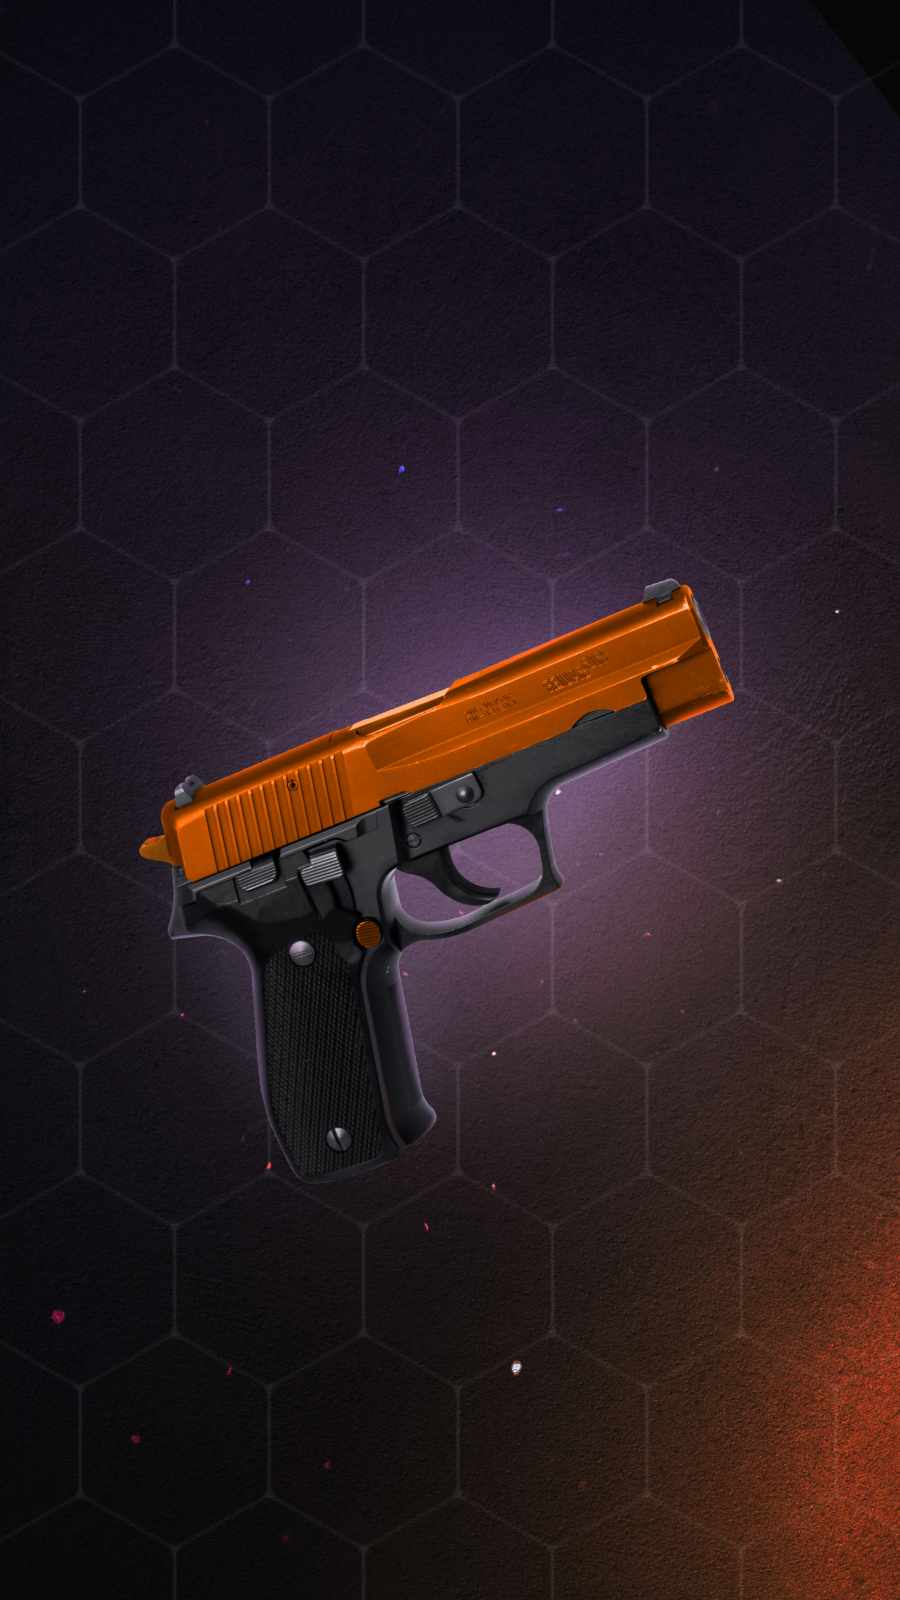 SiG Weapon iPhone Wallpaper HD